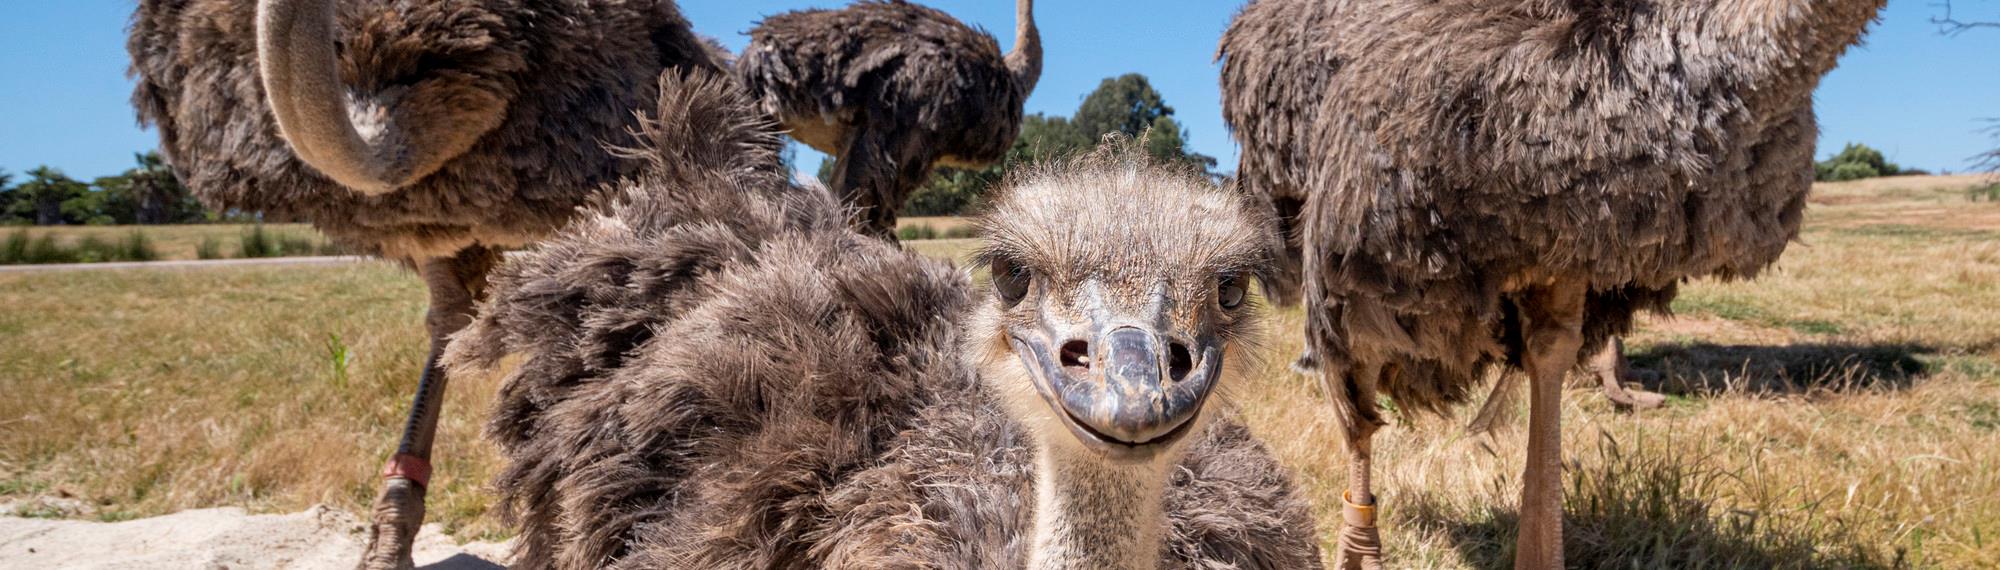 Three Ostriches on the open Savannah, one looking into the camera.